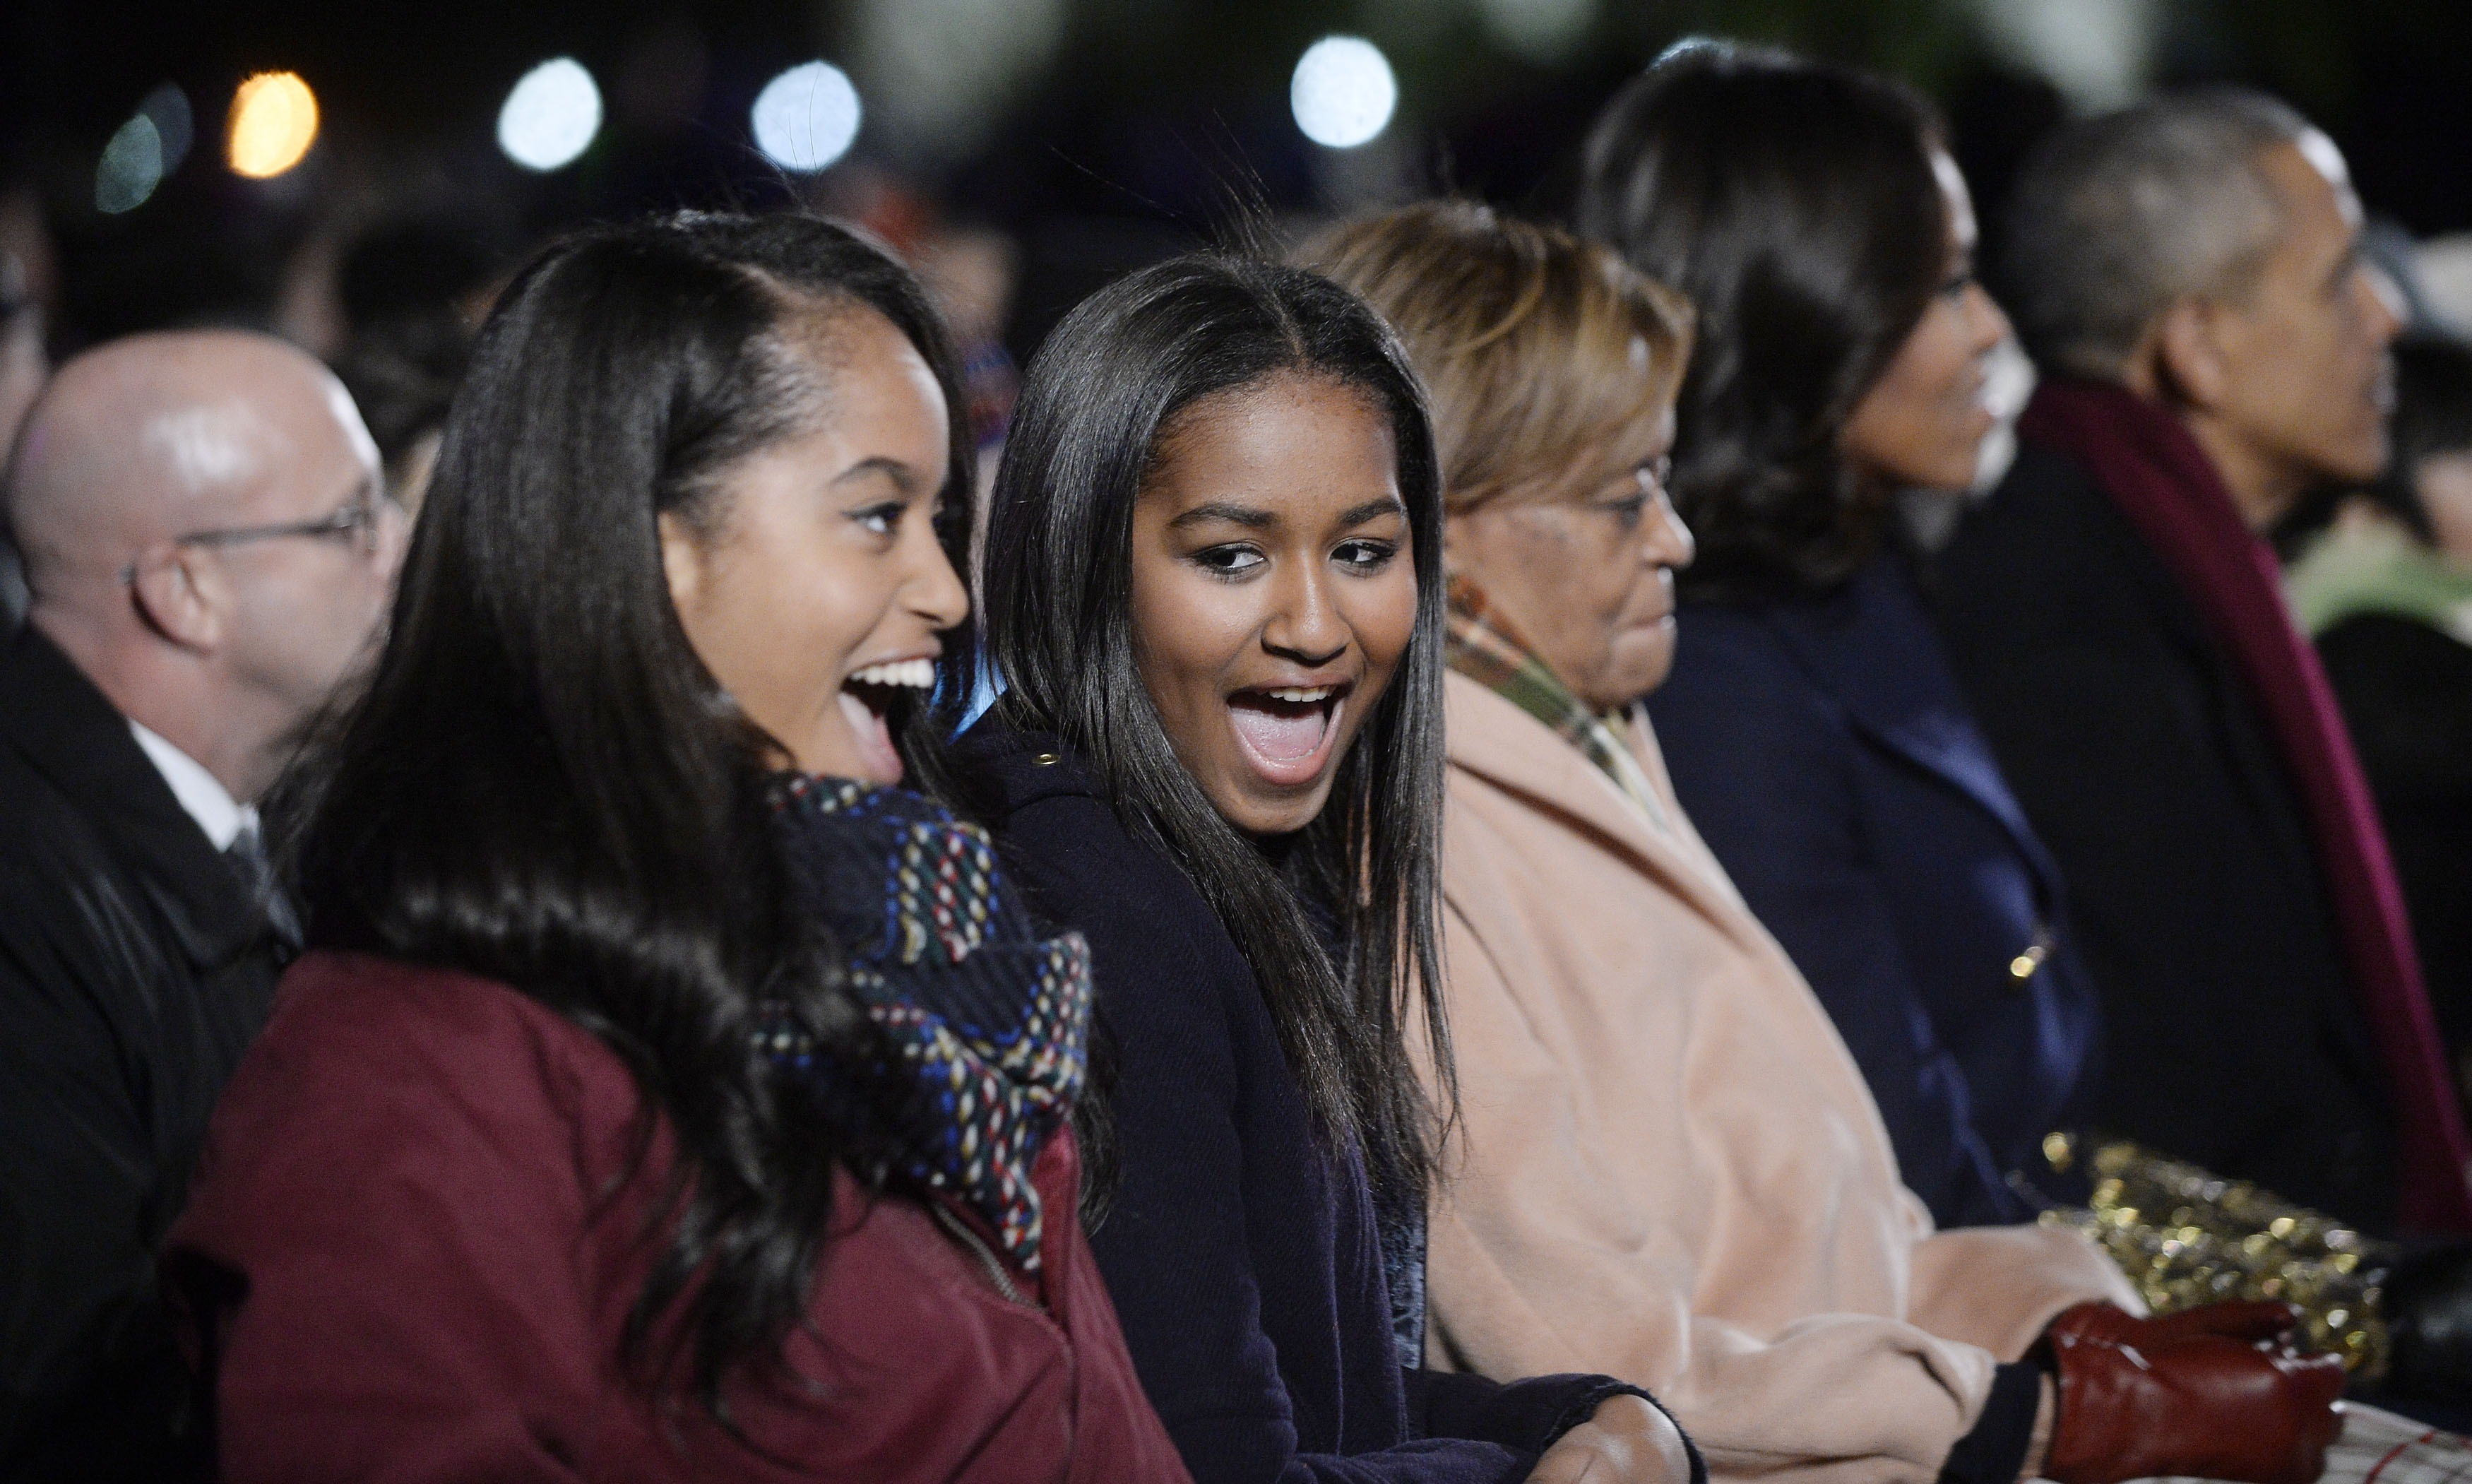 Malia and Sasha Obama with Marian Robinson, Michelle and Barack Obama at the national Christmas tree lighting ceremony in Washington, DC on December 3, 2015 | Source: Getty Images